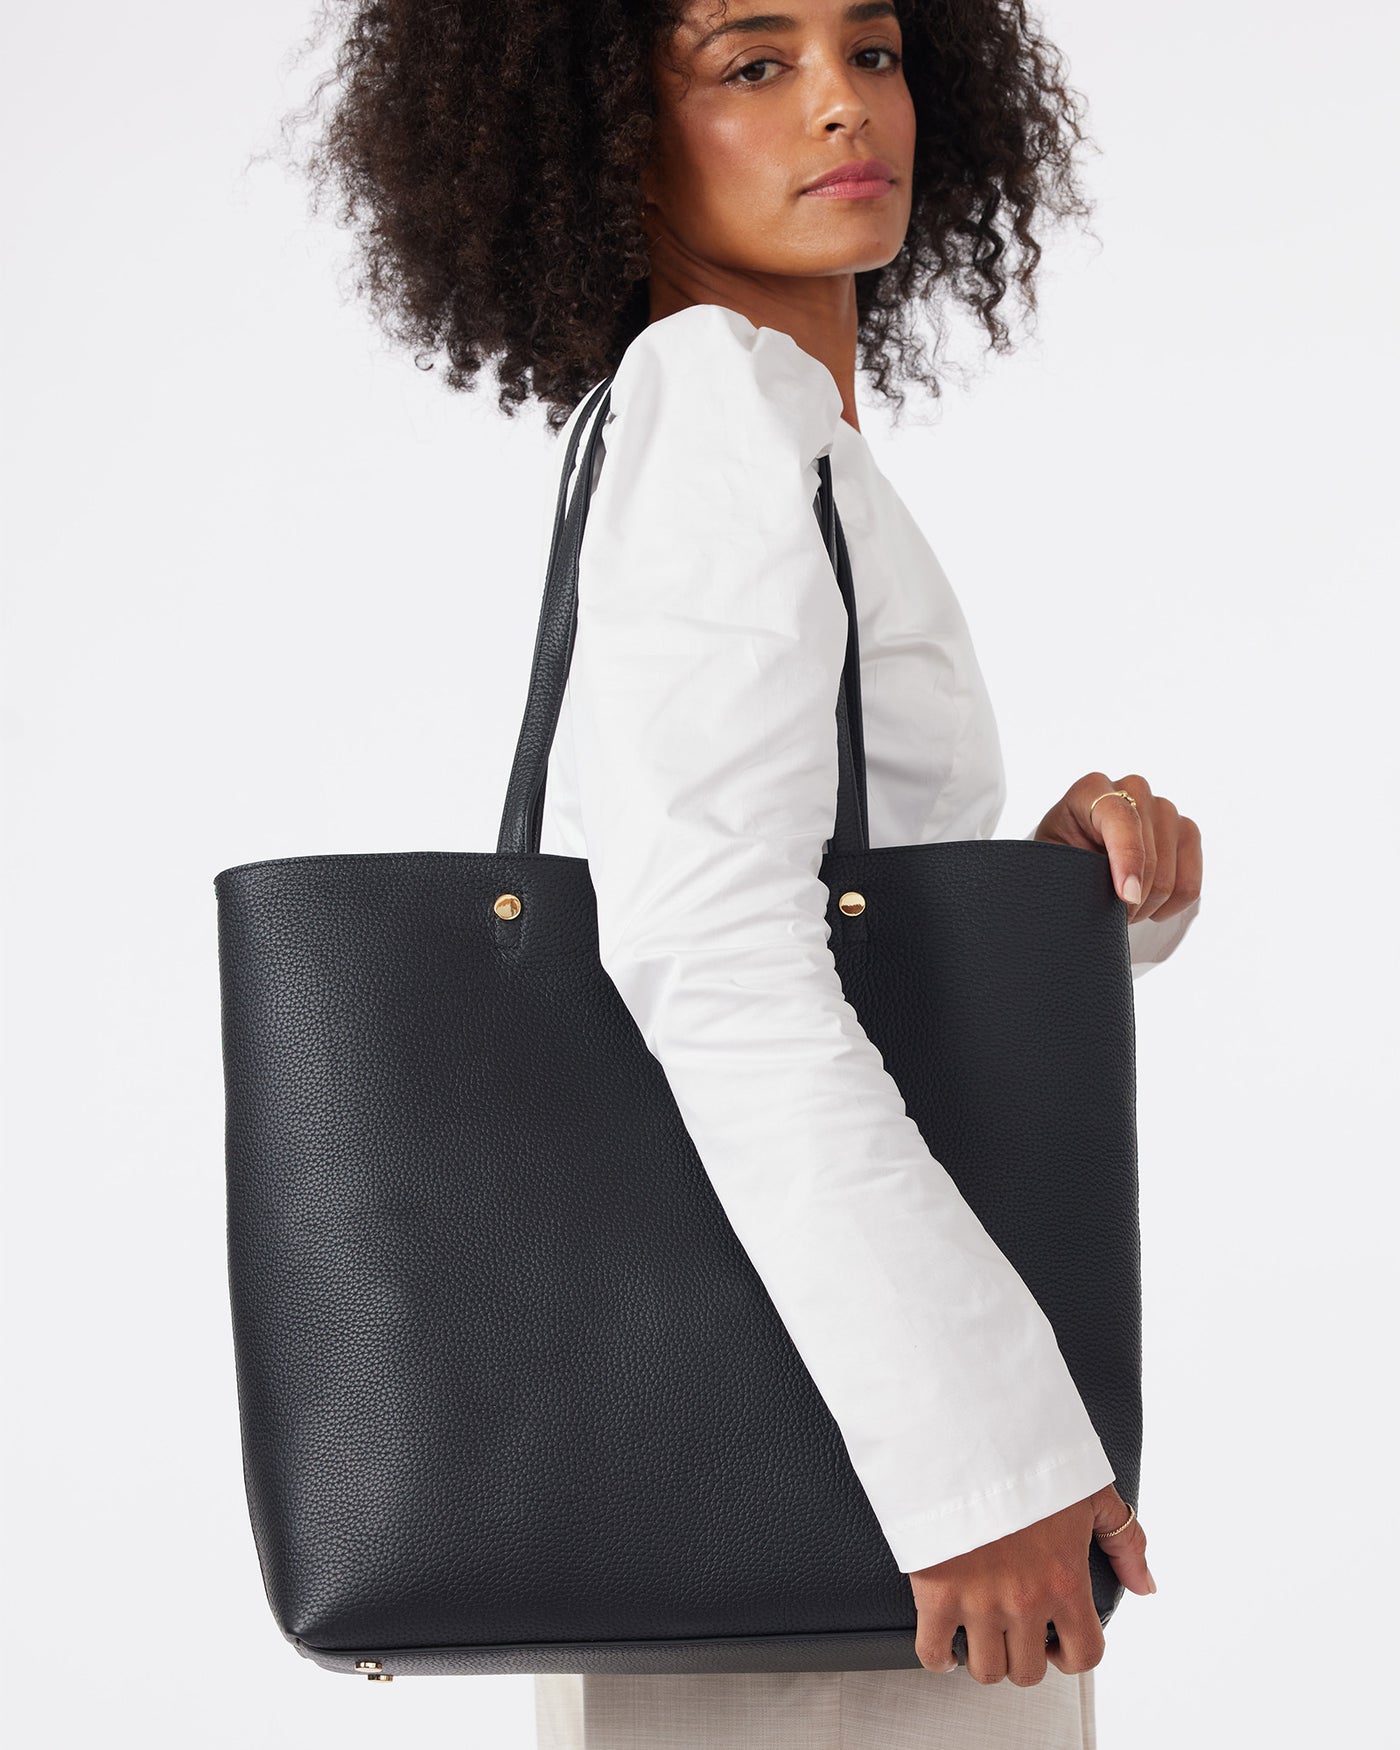 CARTER TOTE (BLACK/TAUPE)